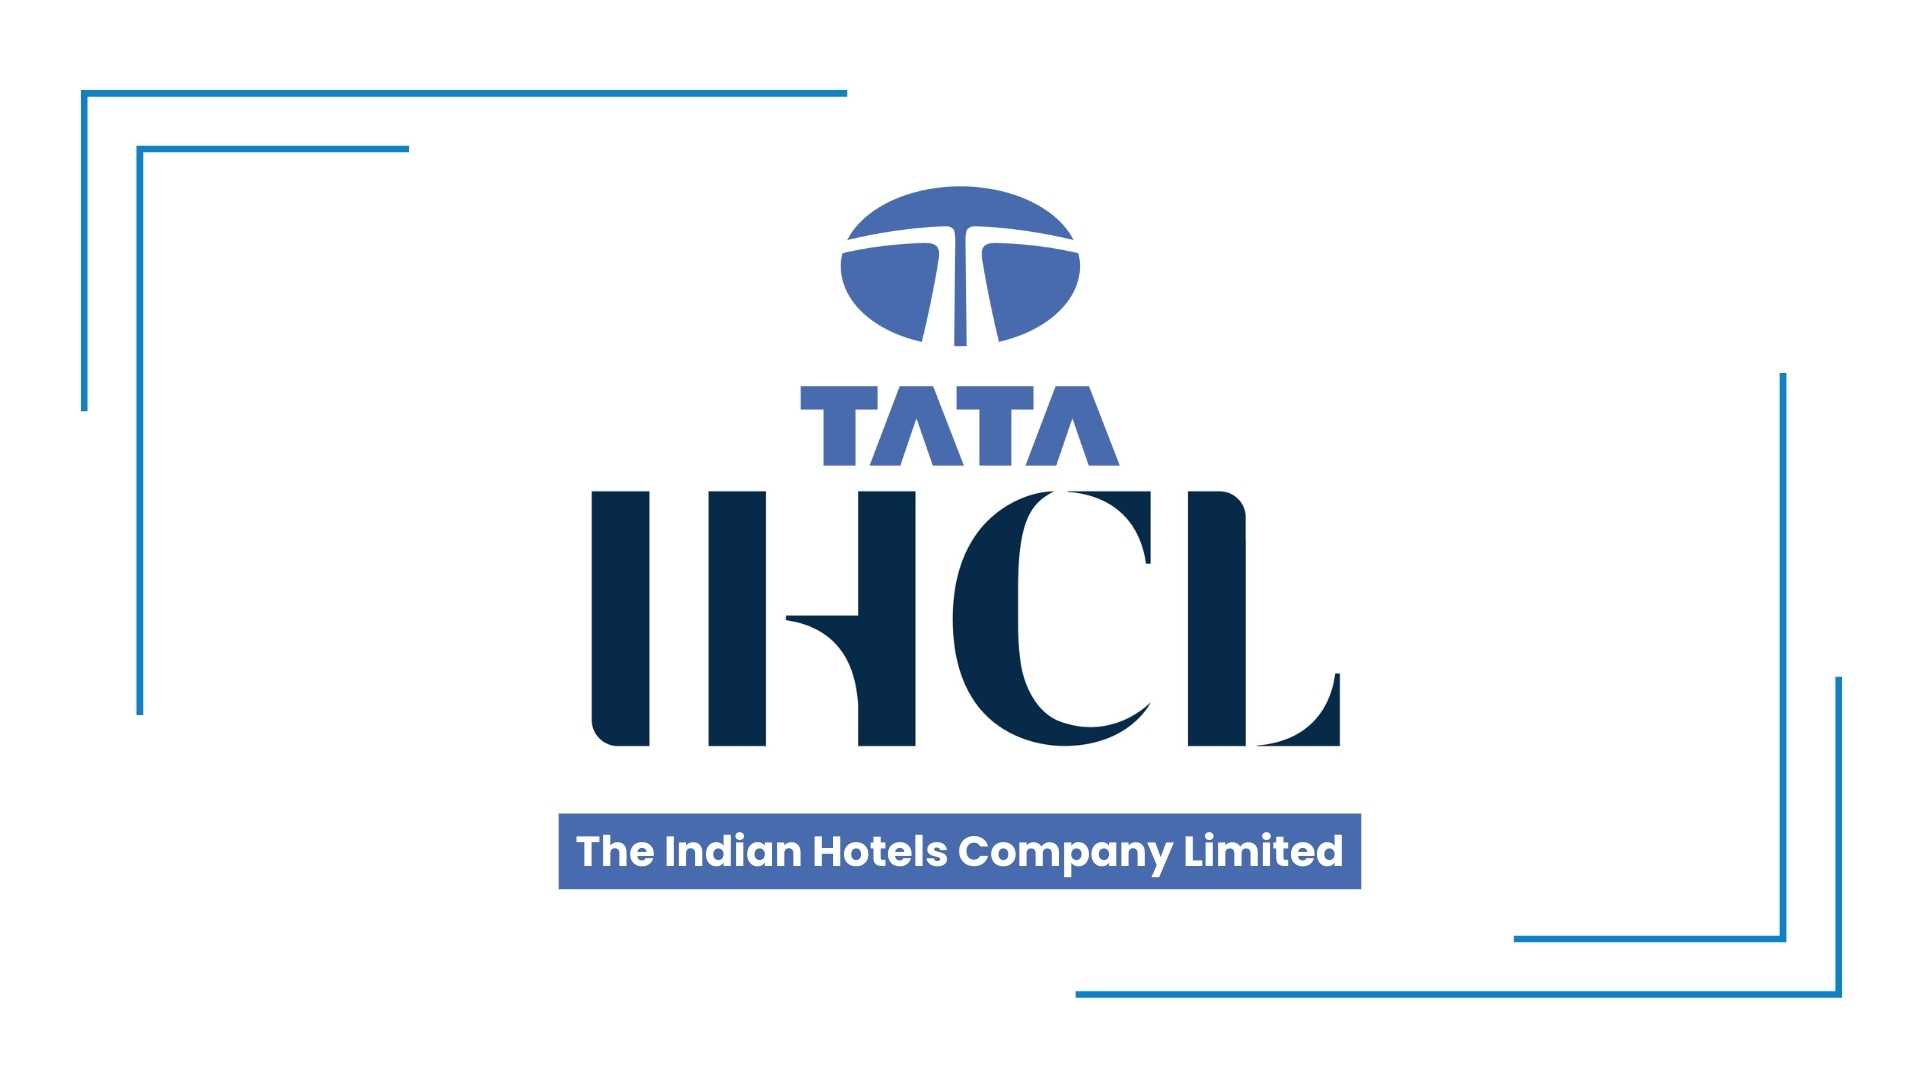 IHCL - List of Companies Owned by Tata Group